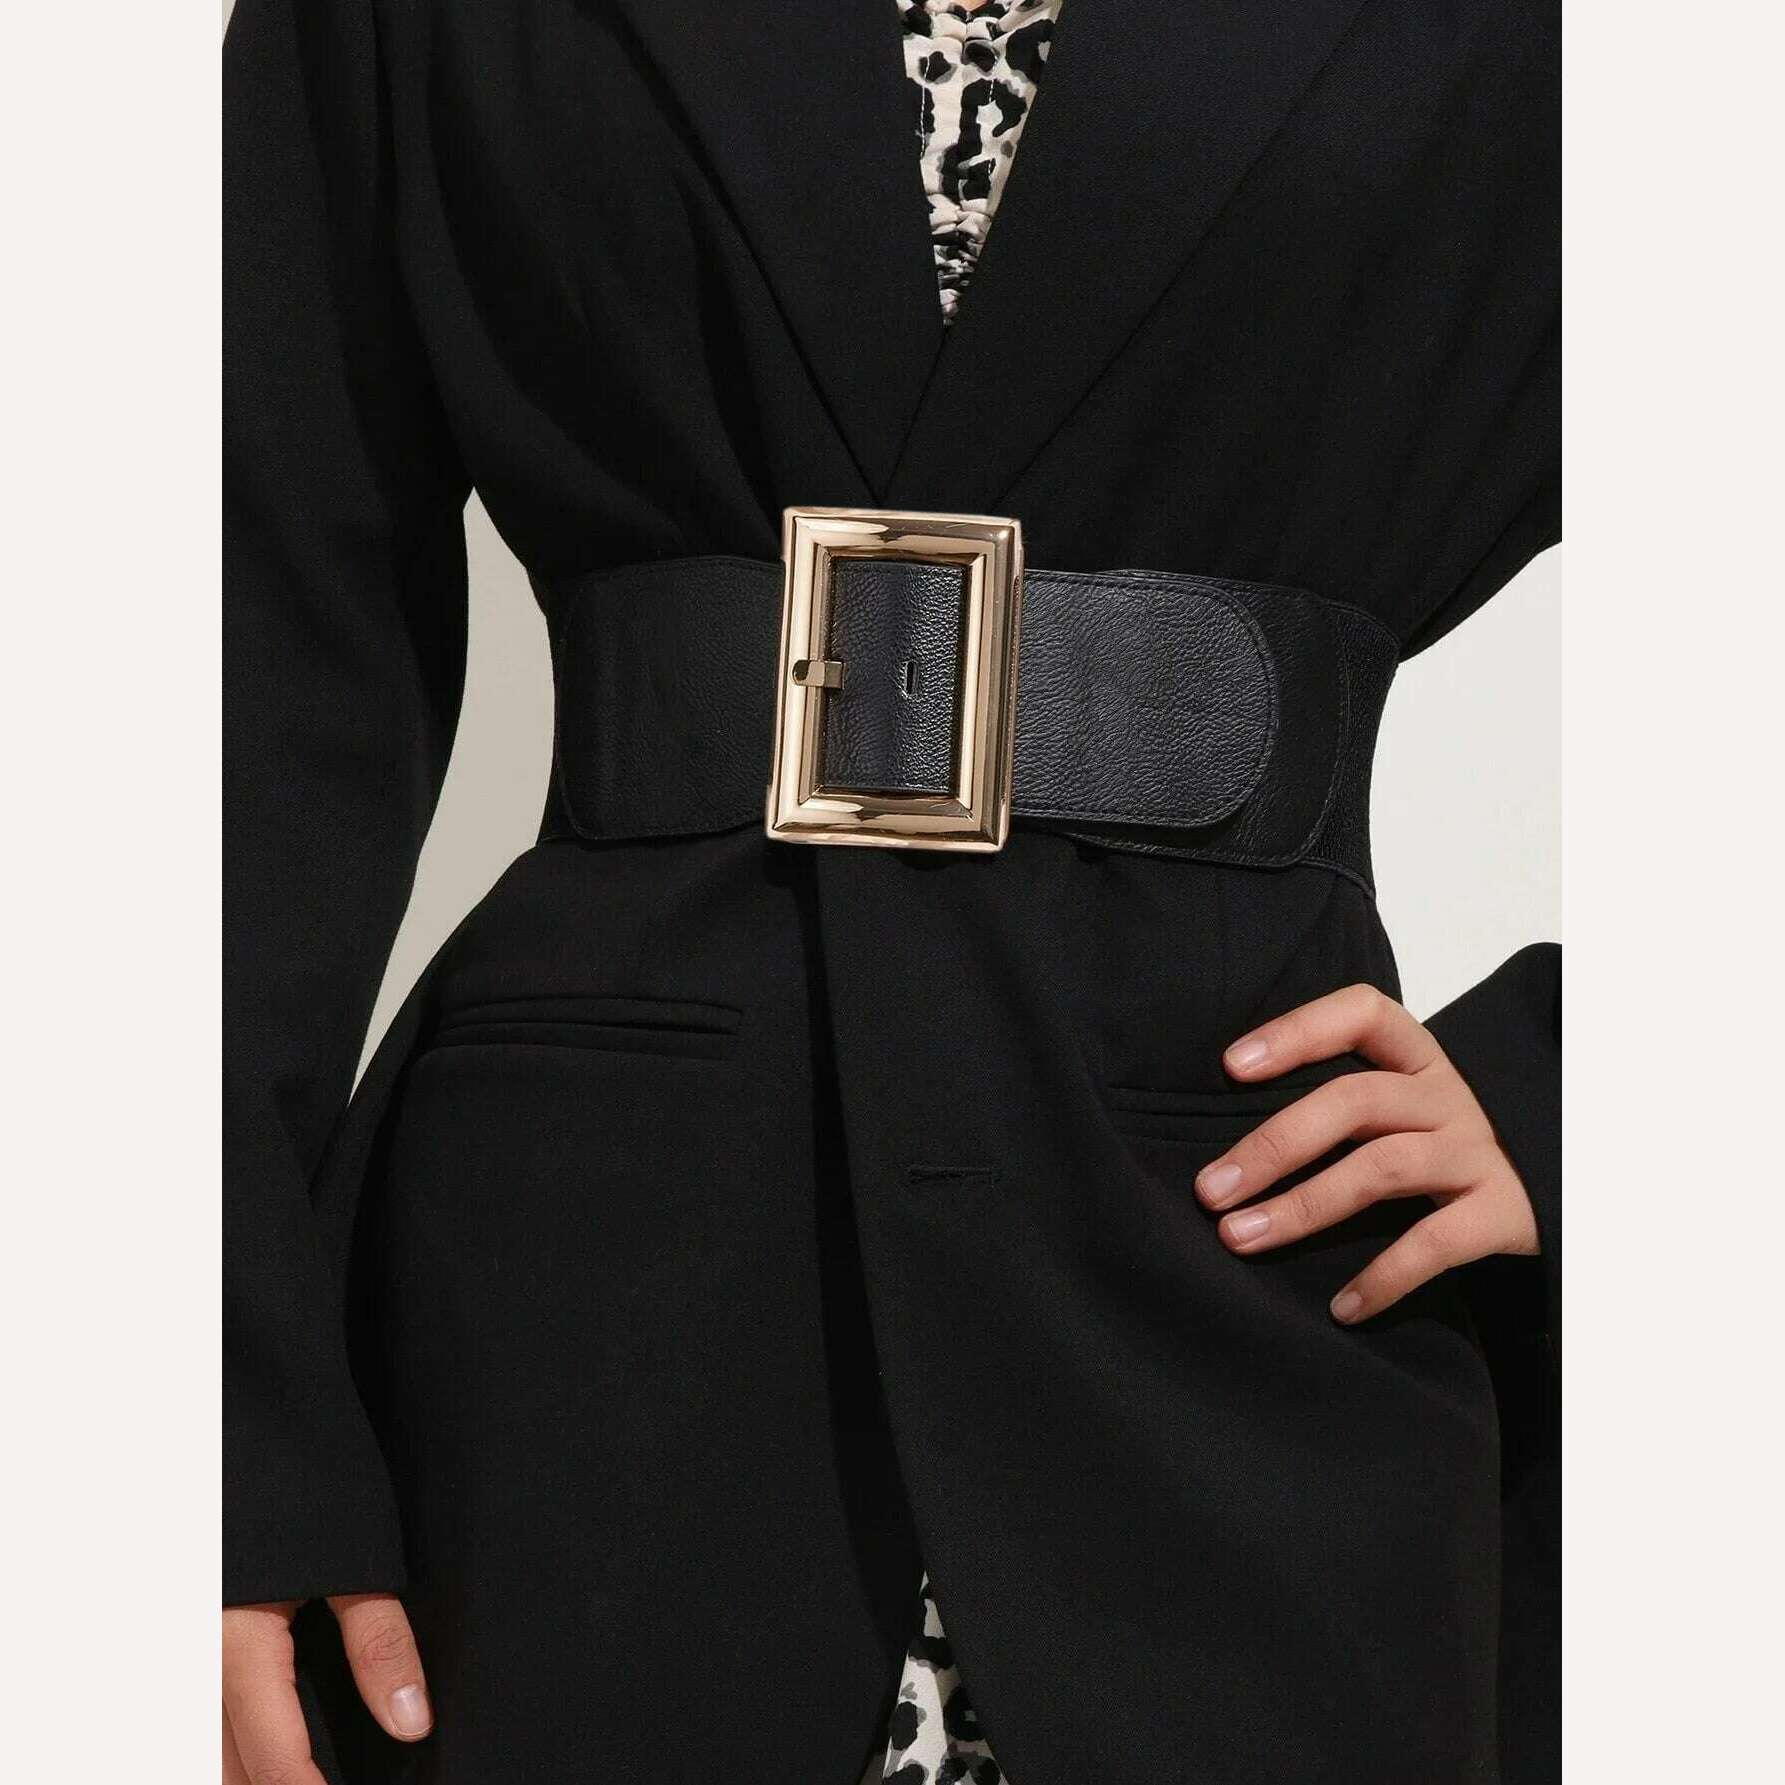 KIMLUD, Wide Square Buckle Women's Elastic Waist Belt To Match Loose Fit Dresses, Coats, Sweaters, Trousers, Skirts, Black / 70cm to 85cm, KIMLUD Womens Clothes